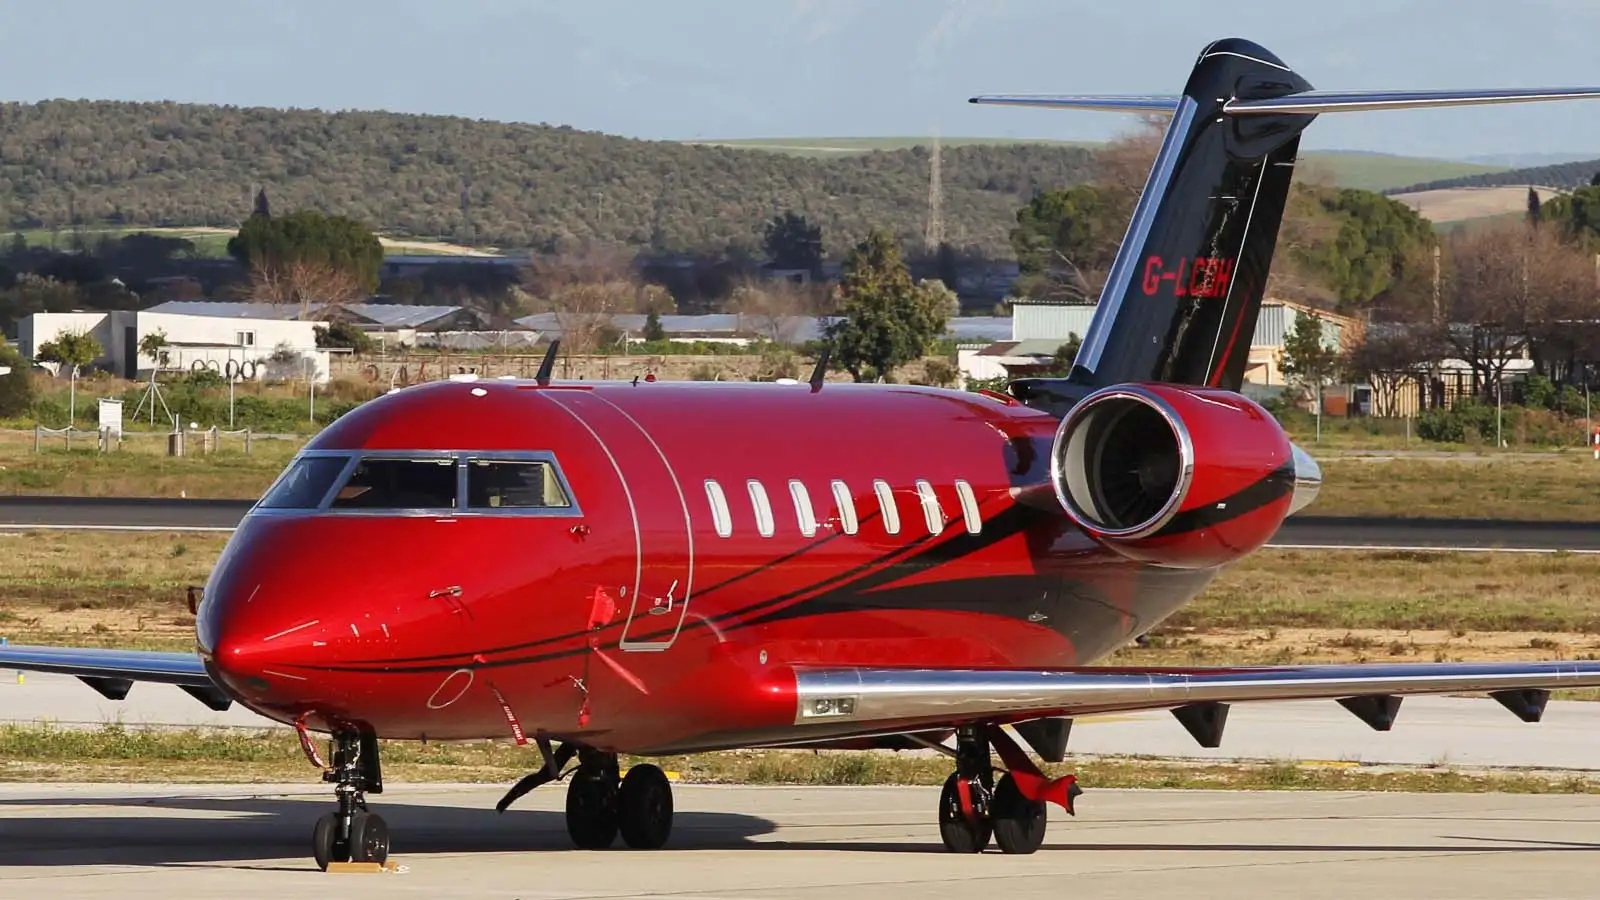 Private jet owned by Lewis Hamilton. F1 Spain February 2013.